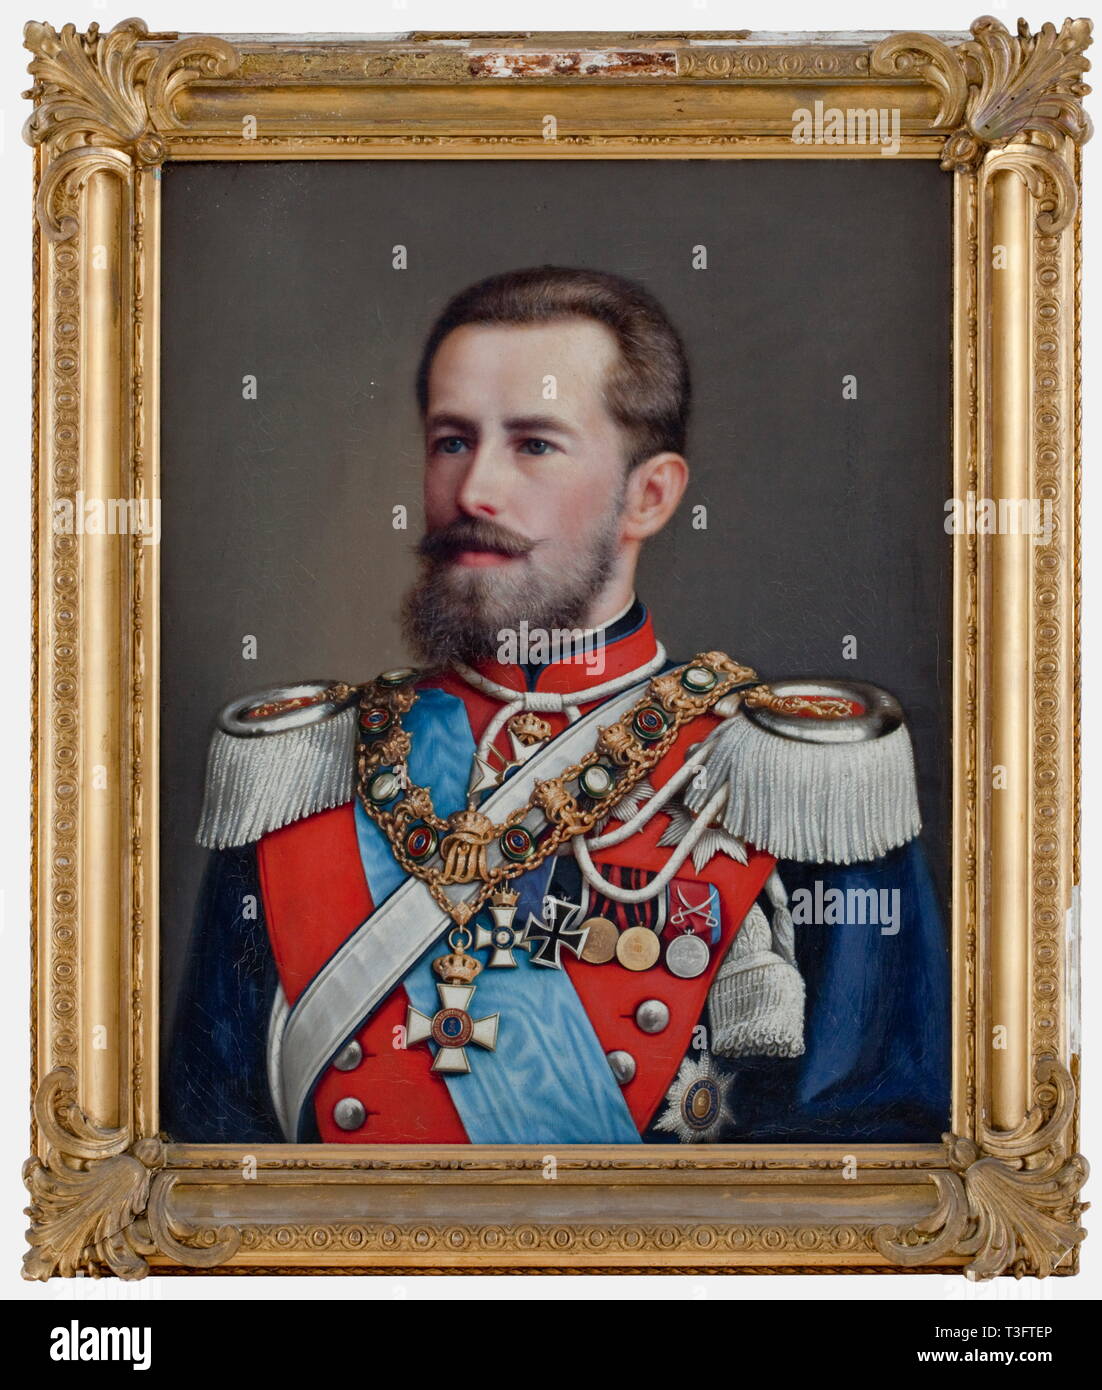 Duke Wilhelm Eugen von Württemberg (1846 - 1877), a portrait painting in uniform Oil on Canvas 52 x 65 cm. Unsigned. Damaged plaster frame. The Duke is wearing a uniform for a Uhlan staff officer with the collar of the Oldenburg House and Service Order, the Star of the Order of the Black Eagle, and the Knight’s Cross of the Württemberg Military Merit Order and the Schaumburg-Lippe Military Merit Medal with Sabres on the medal bar next to the Iron Cross 1870. Very high quality portrait. Duke Wilhelm Eugen was married to Duchess Wera (1854 - 1912)., Additional-Rights-Clearance-Info-Not-Available Stock Photo